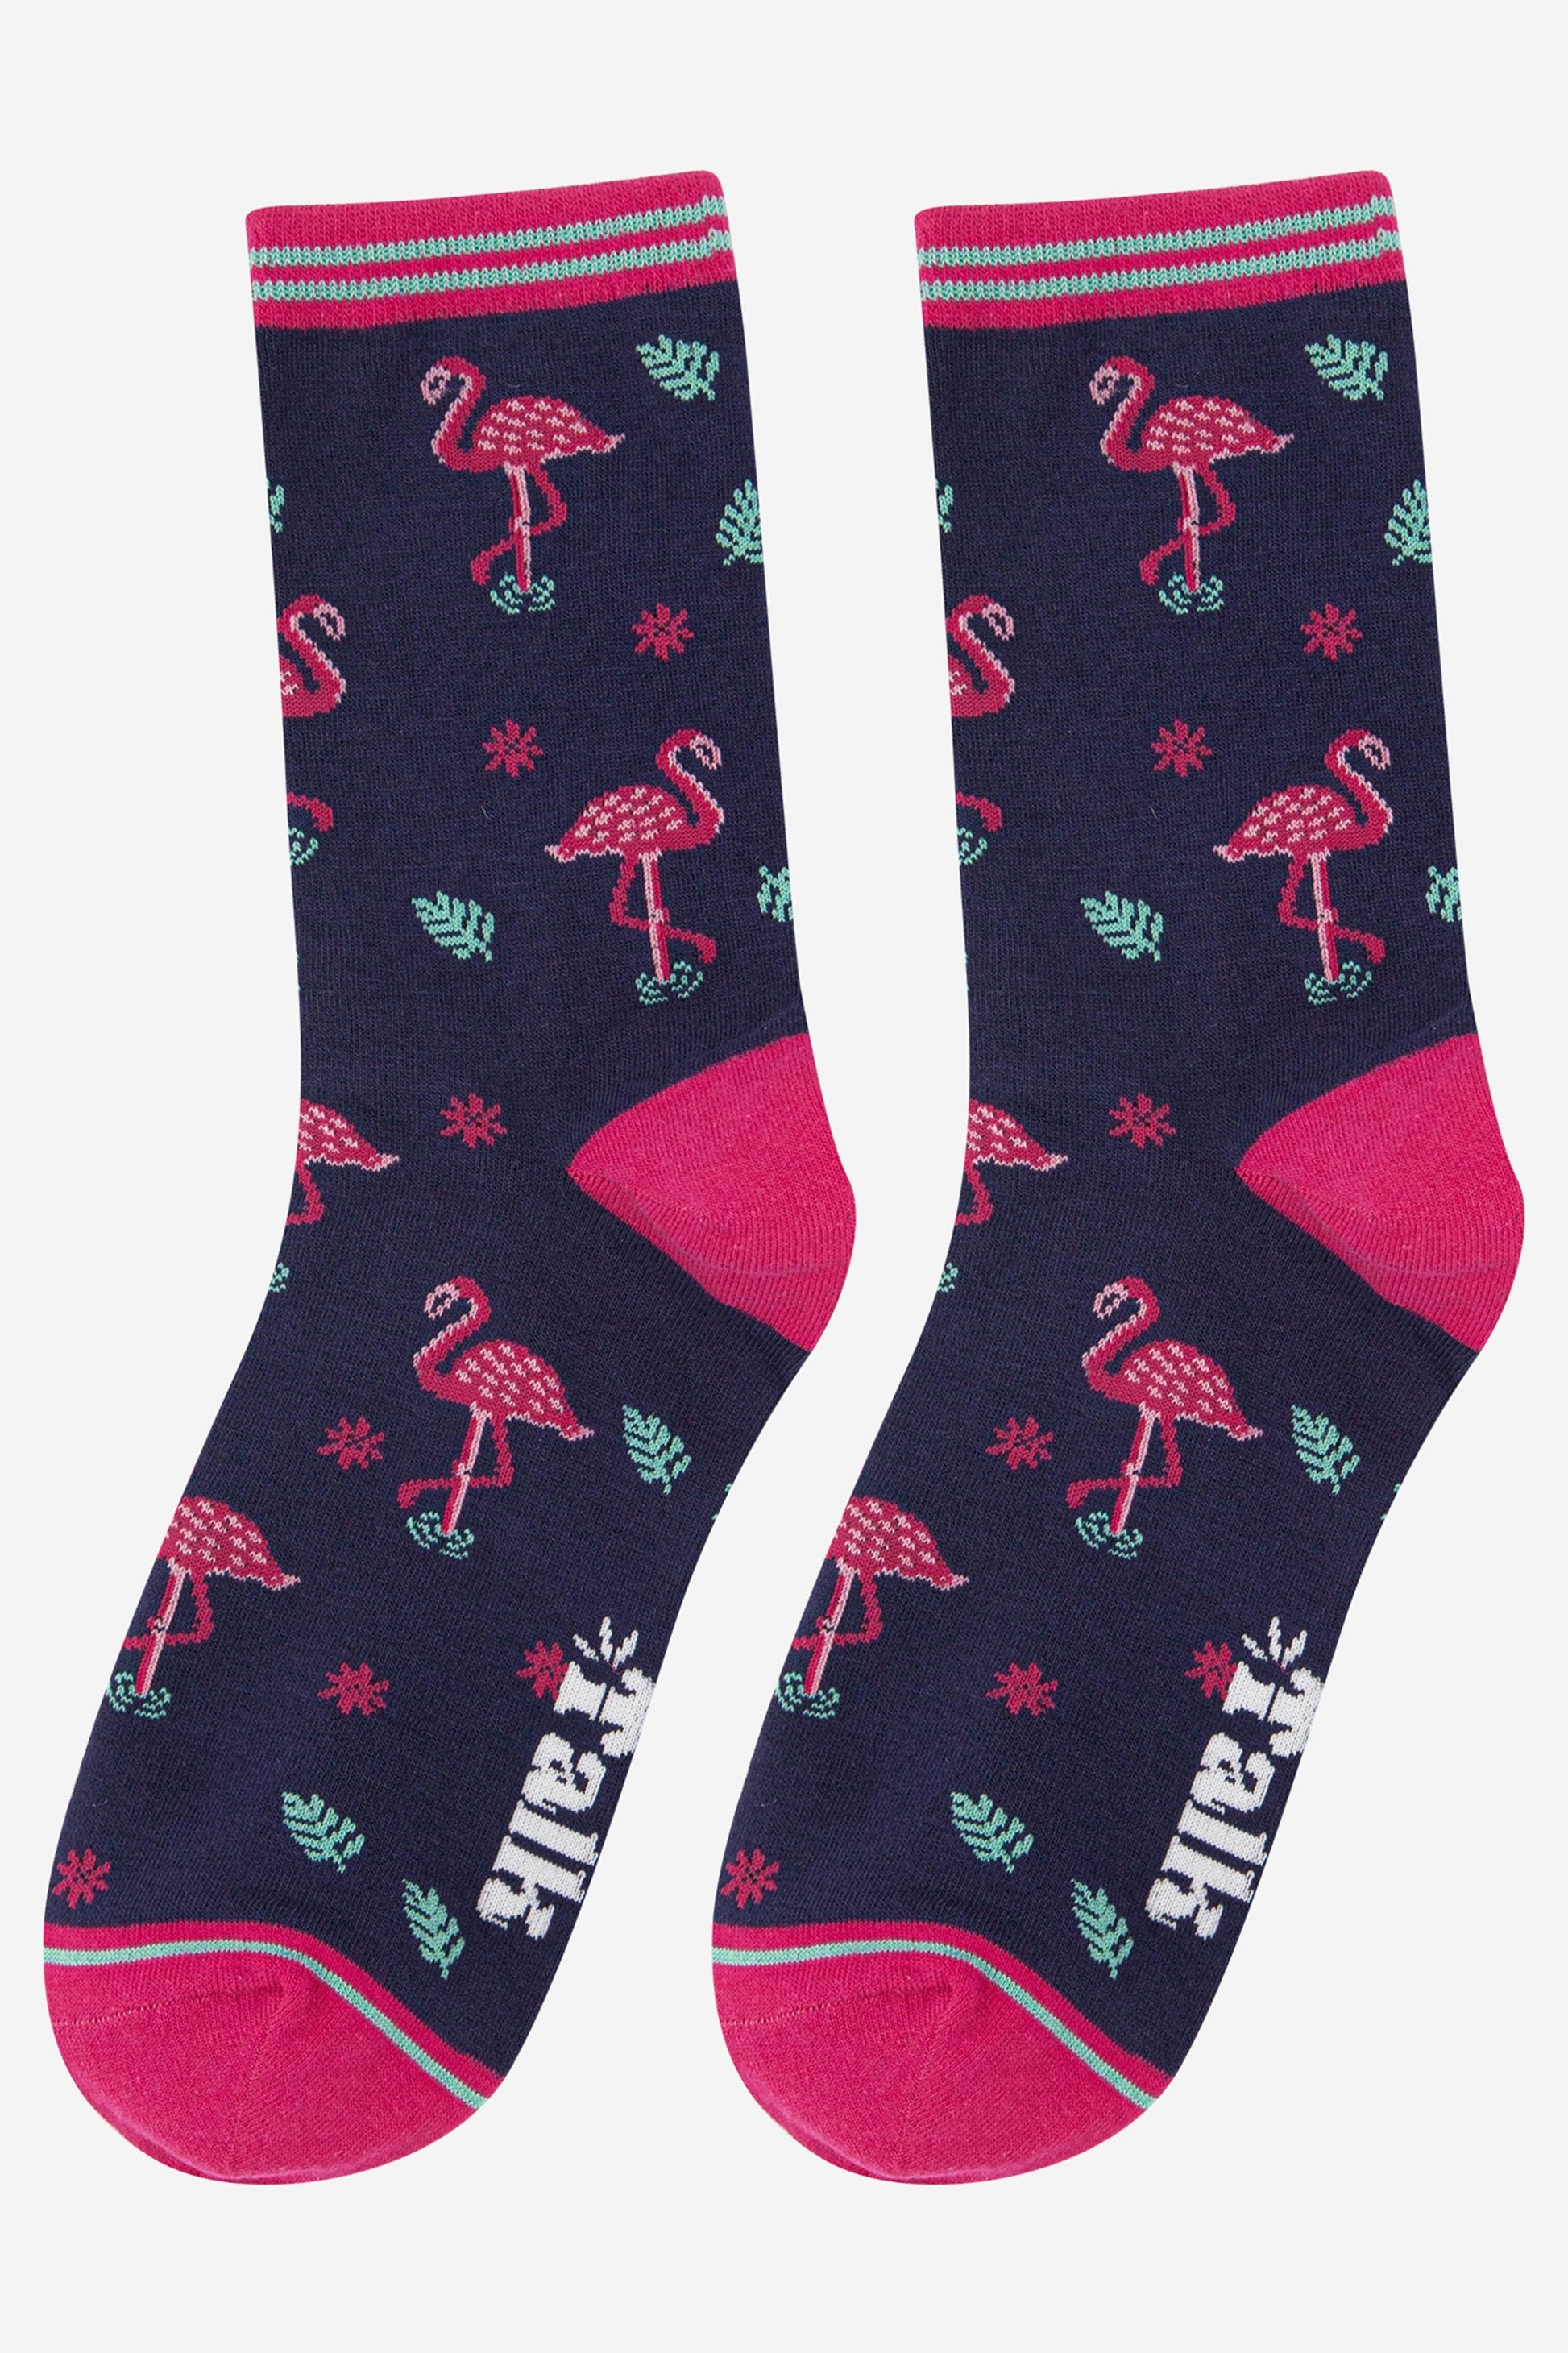 navy blue and pink flamingo bird print ankle socks, the socks feature pink flamingos and green jungle leaves